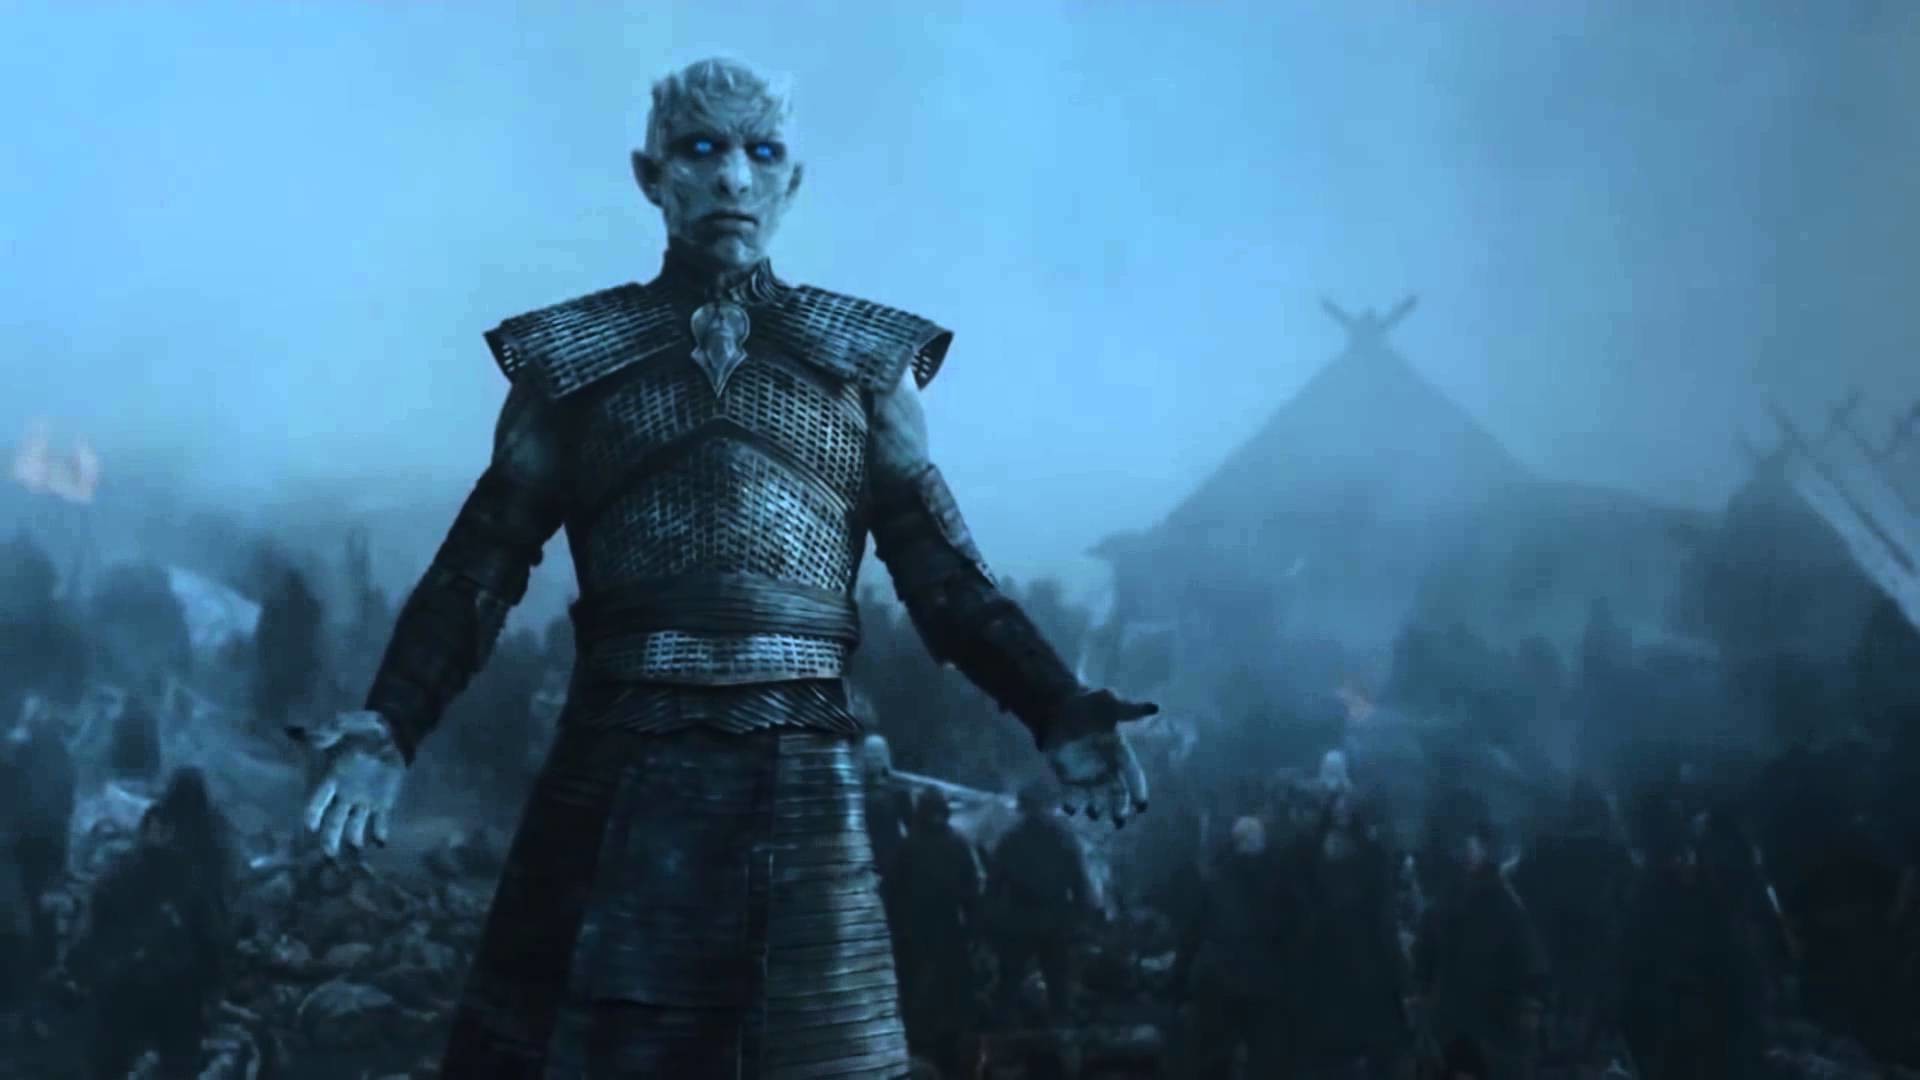 1920x1080 Game of Thrones - John Snow and the Night's King Staredown